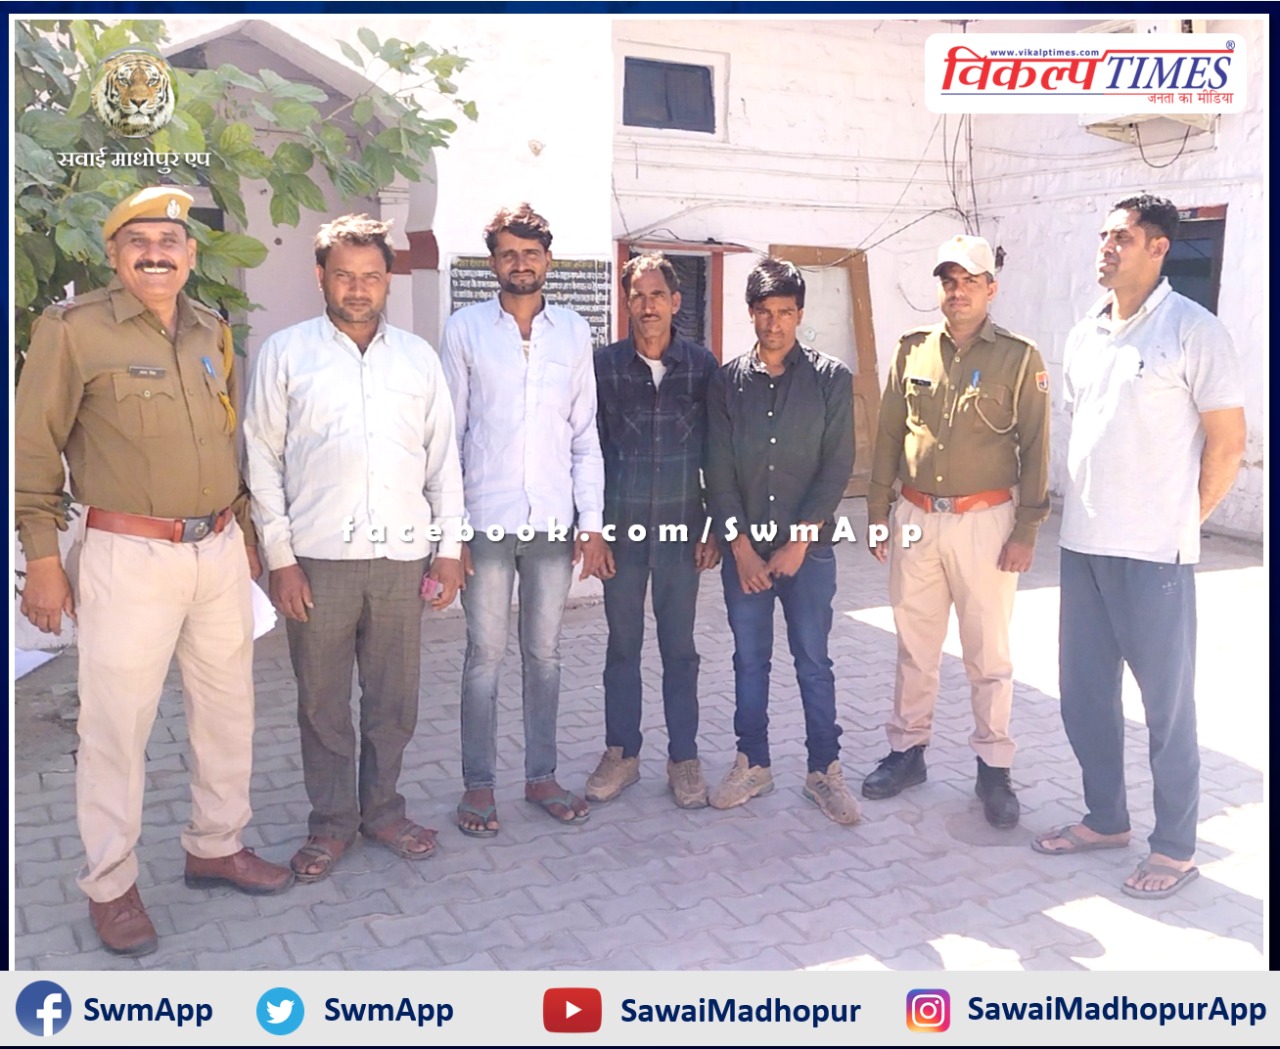 Police seized four tractor trolleys filled with illegal gravel and drivers arrested in khandar sawai madhopur